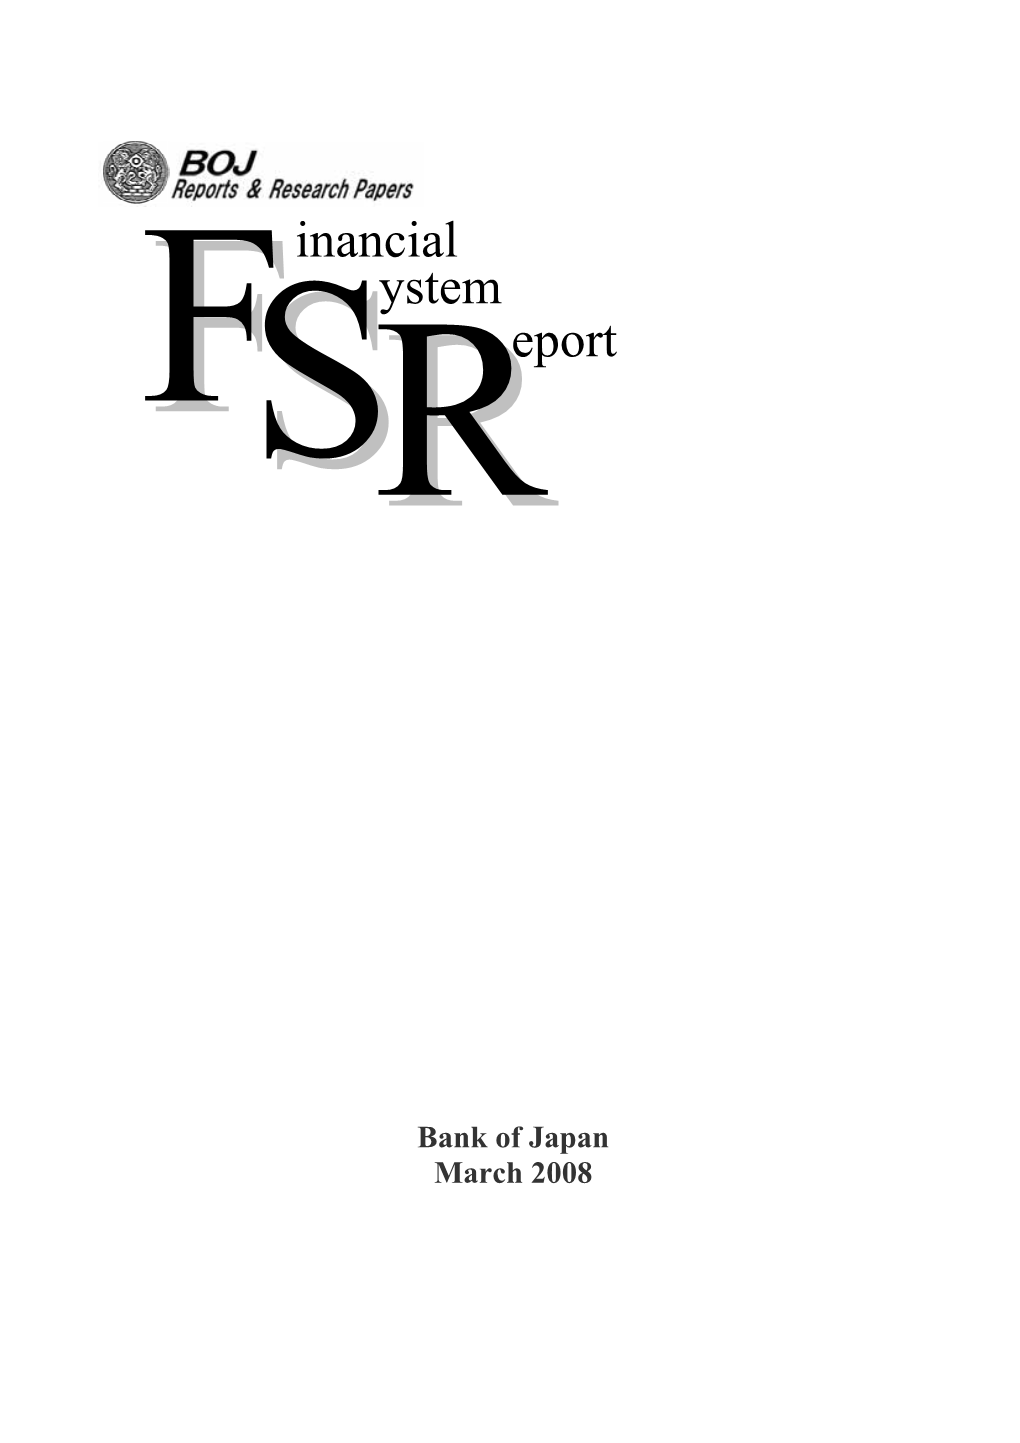 Financial System Report Bank of Japan March 2008